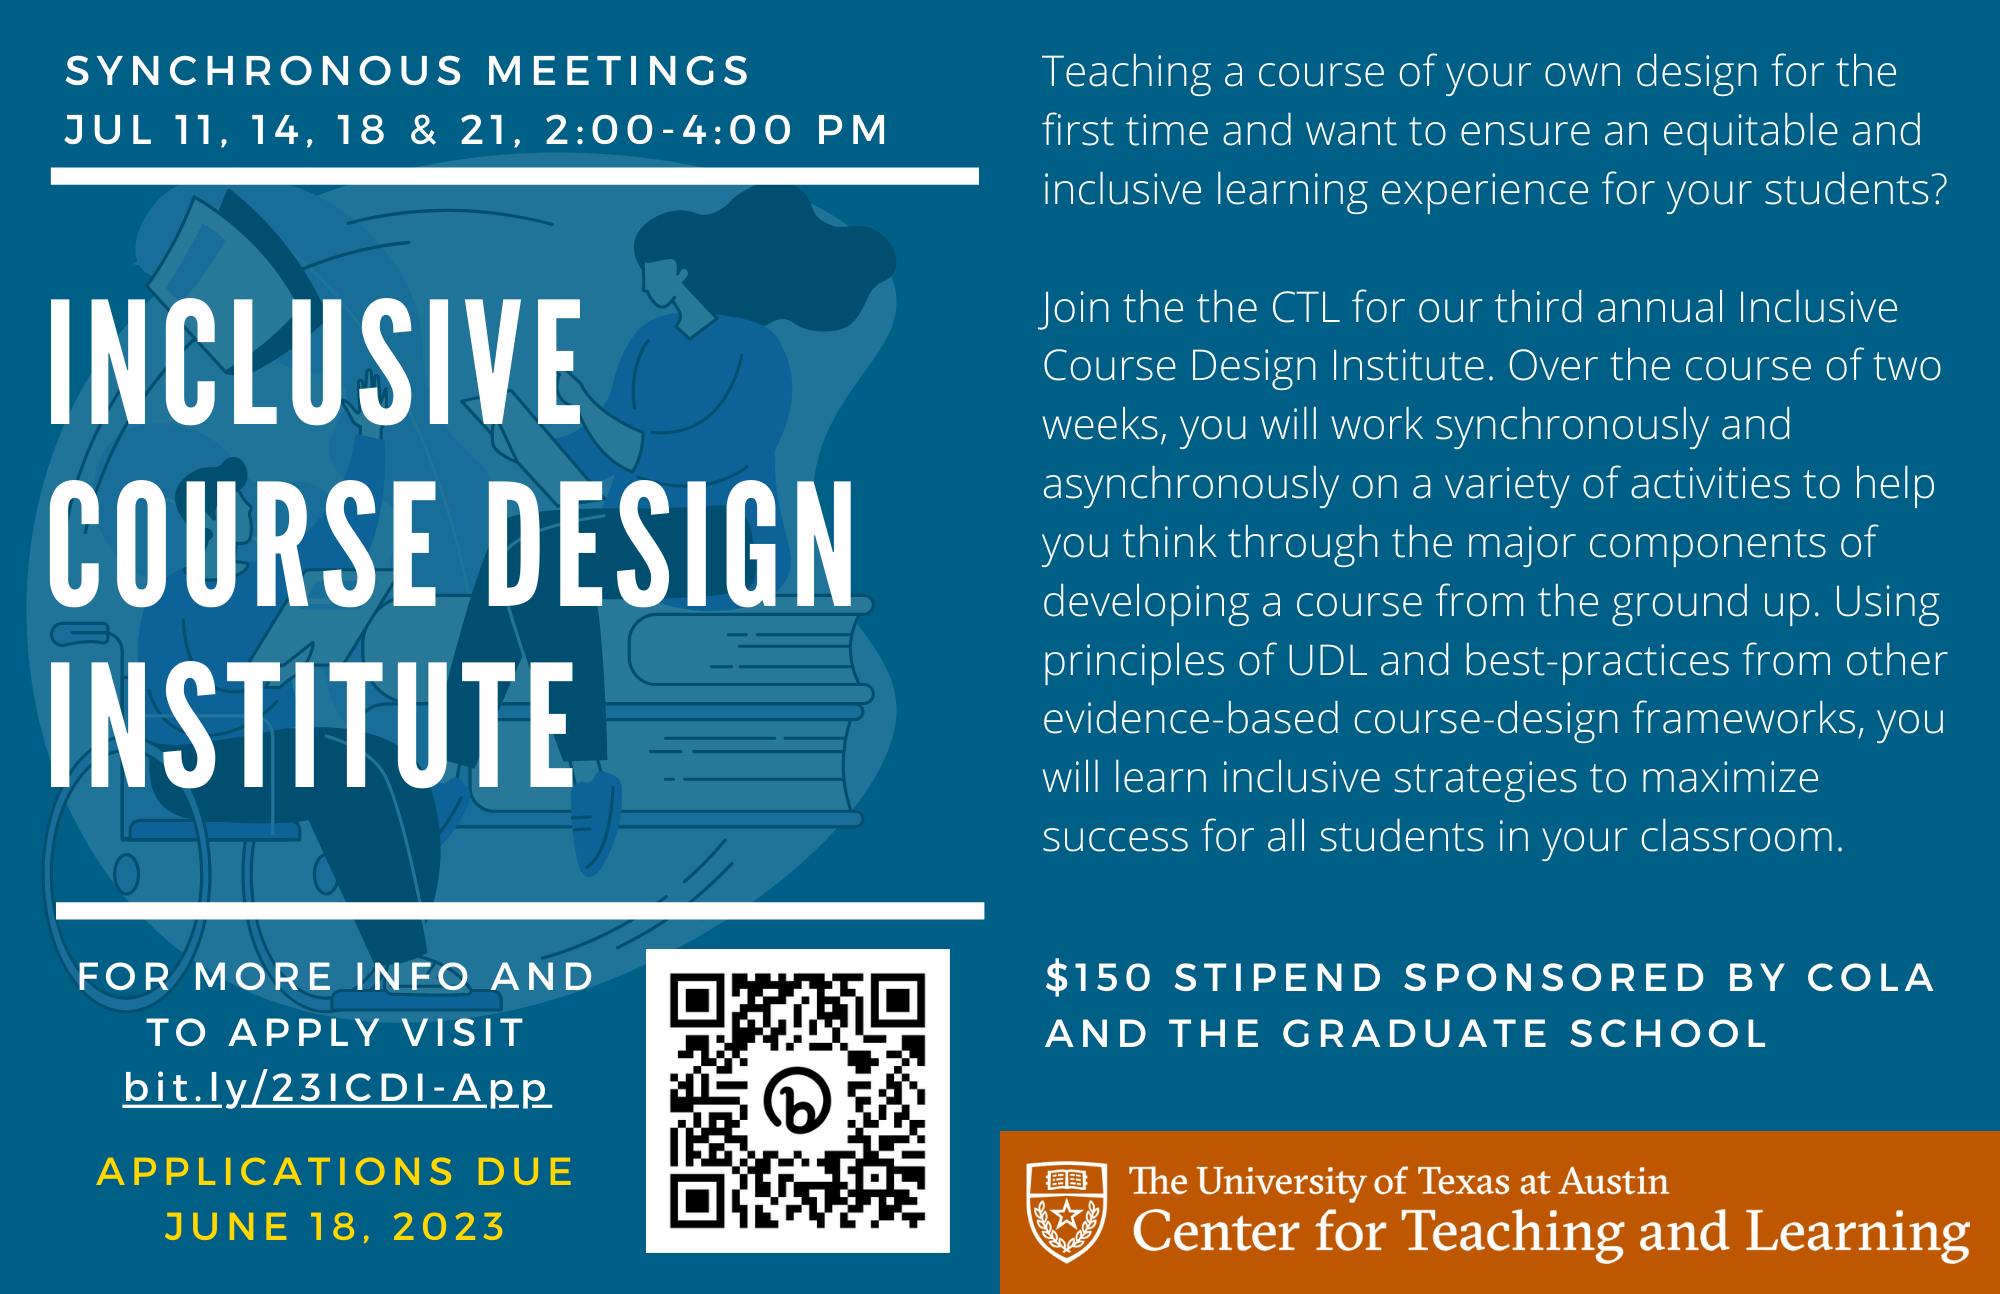 Graphic invitation to apply to the Inclusive Course Design Institute. The text of the invitation is in the body of this event.